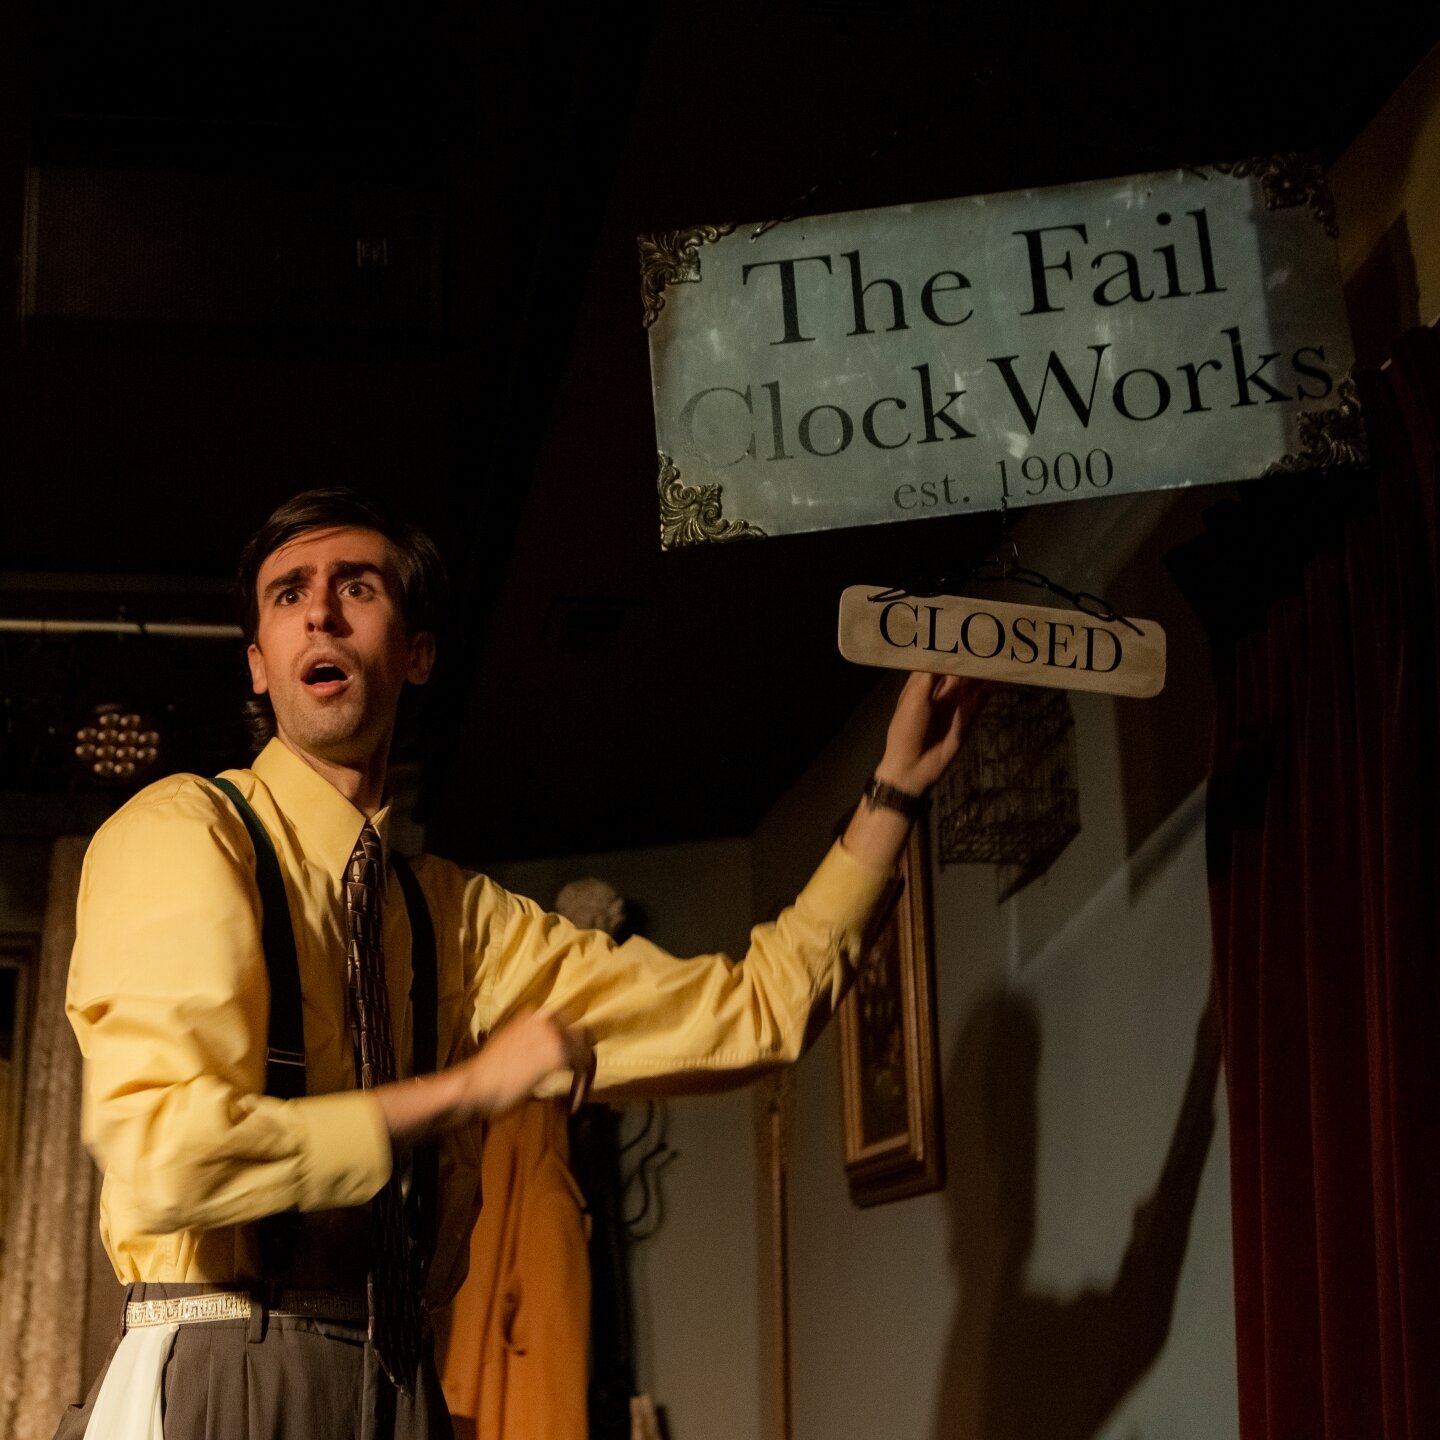 Only 3 weeks until The Fail Clock Works must close!! See this tale full of humor &amp; heart where I play half a dozen characters! Failure: A Love Story runs until September 4th at The Oil Lamp Theater.

#oillamptheater #chicagotheatre #acting 

Phot